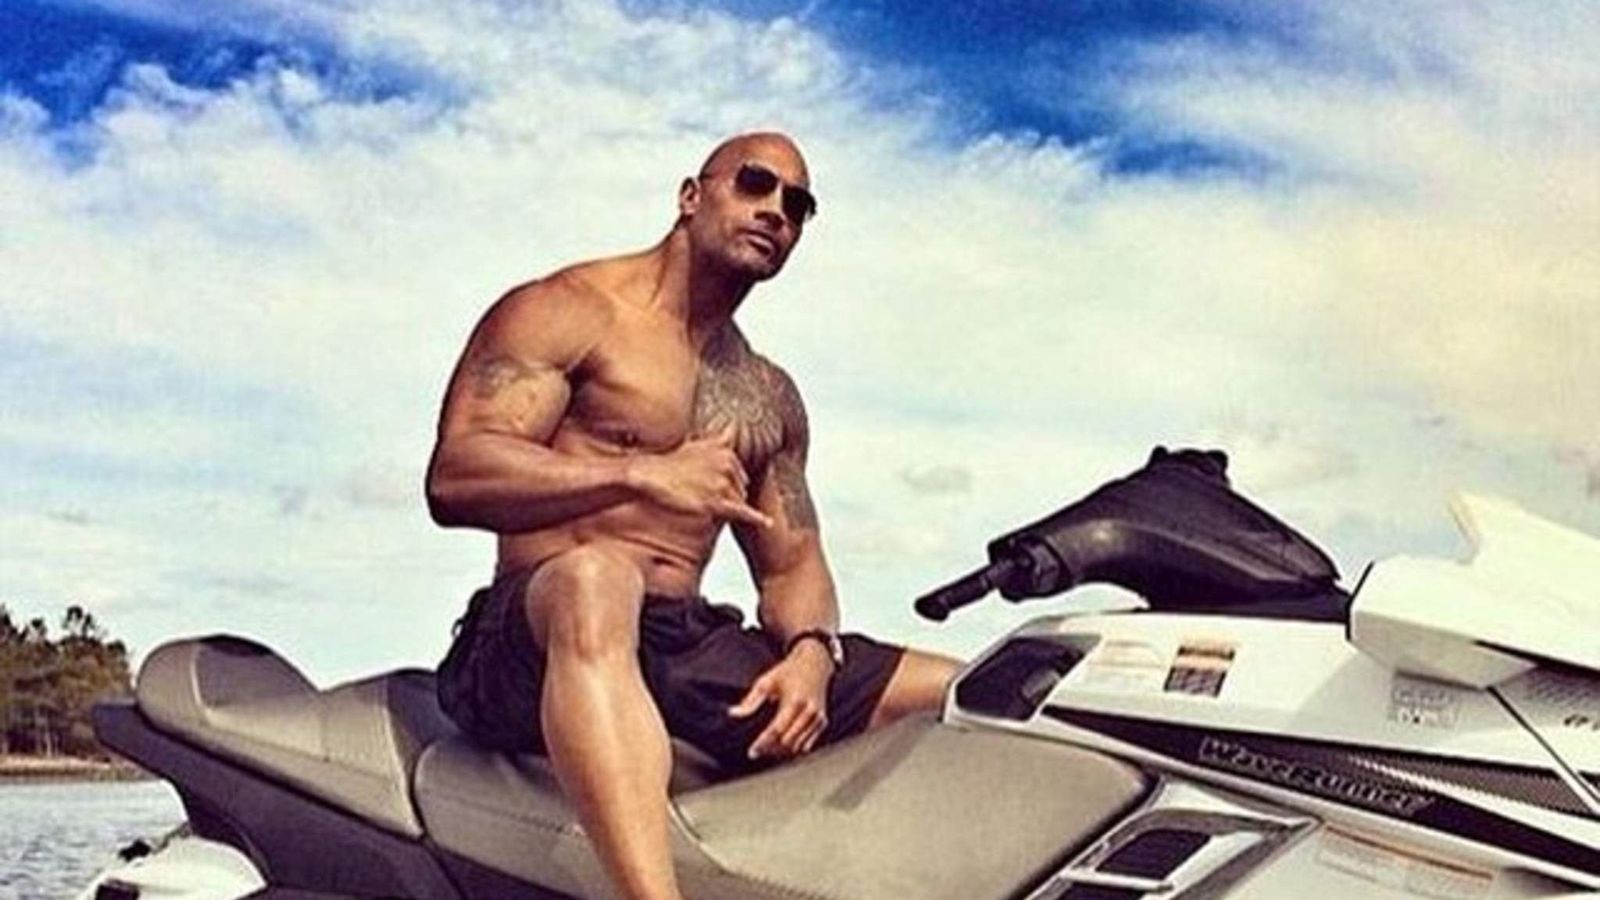 dwayne-the-rock-johnson-rips-off-electric-gate-with-bare-hands-to-avoid-being-late-for-work